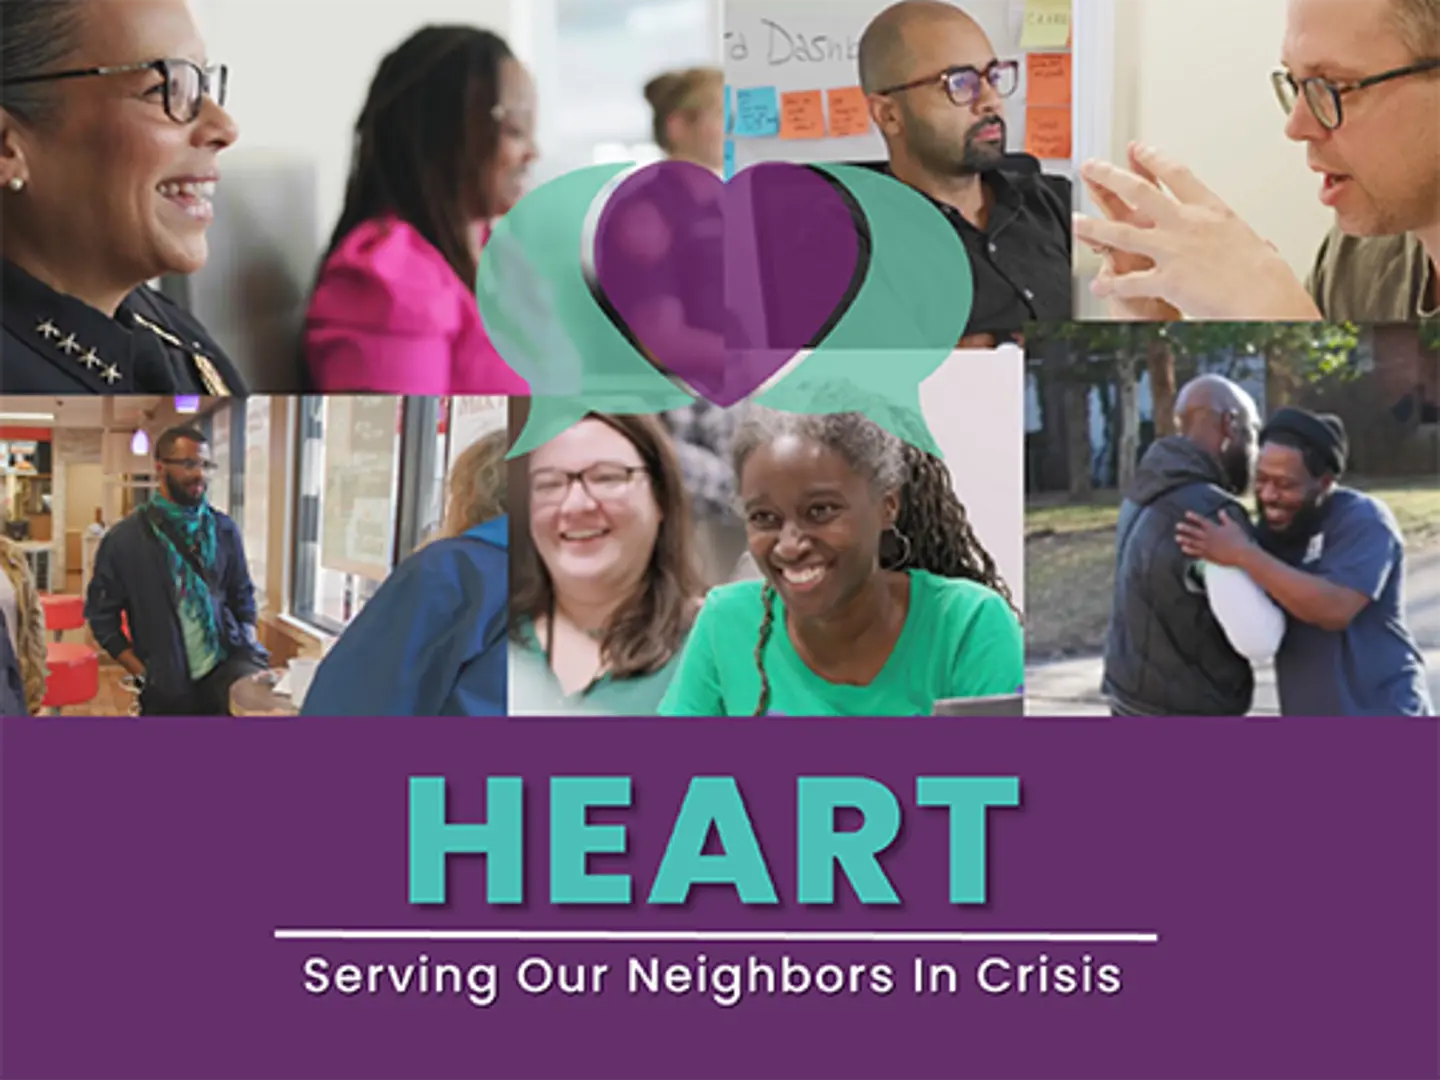 "Heart serving our neighbors in crisis" Members of the community coming together